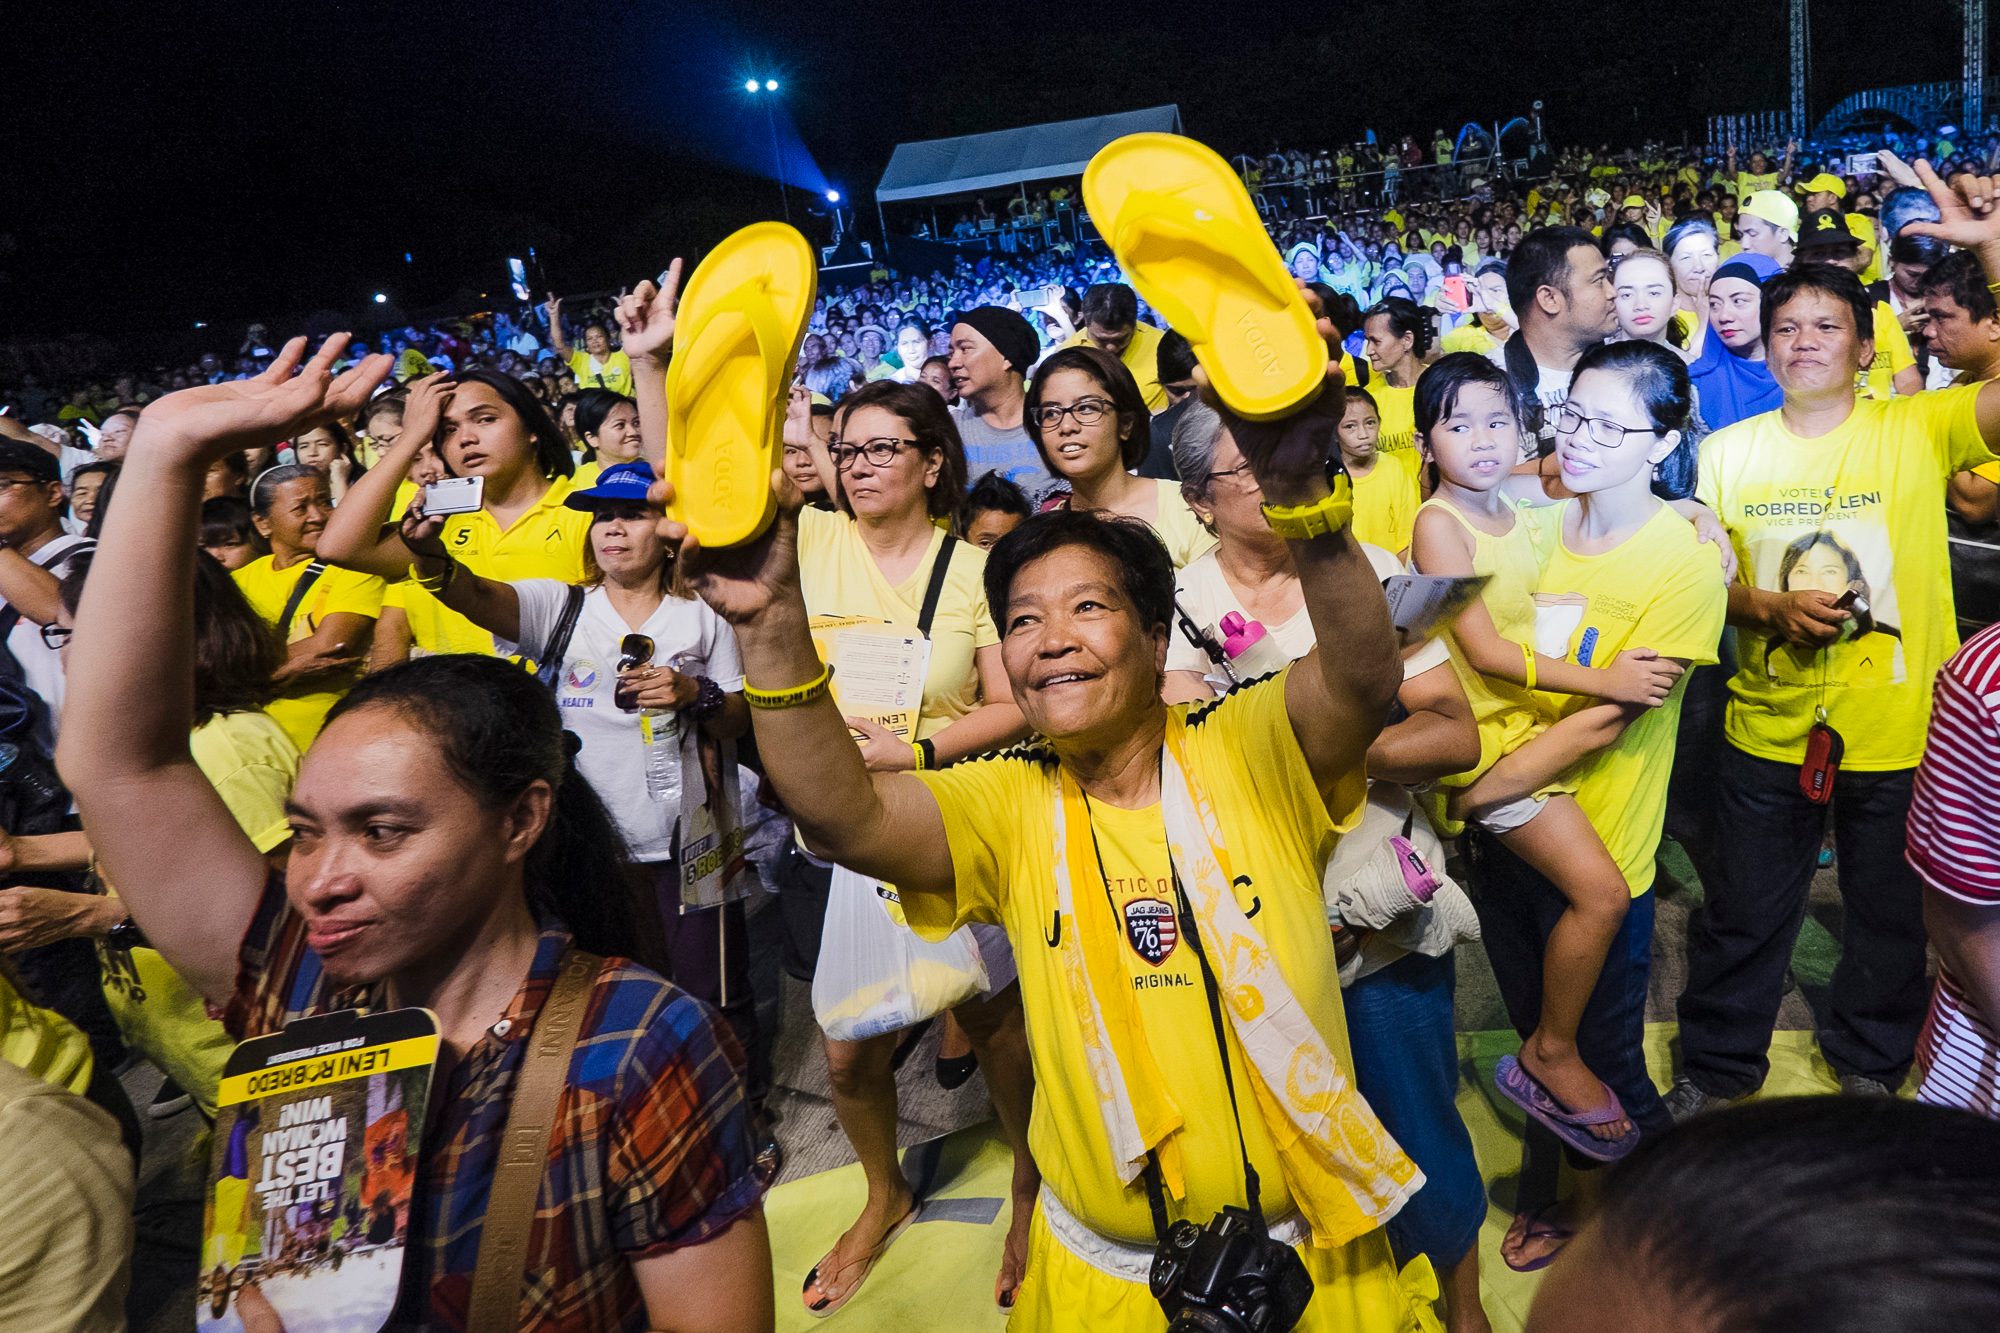 TSINELAS LEADERSHIP. A supporter waves her slippers in the air. Slippers are symbolic of Robredo's type of leadership. All photos by Pat Nabong/Rappler  